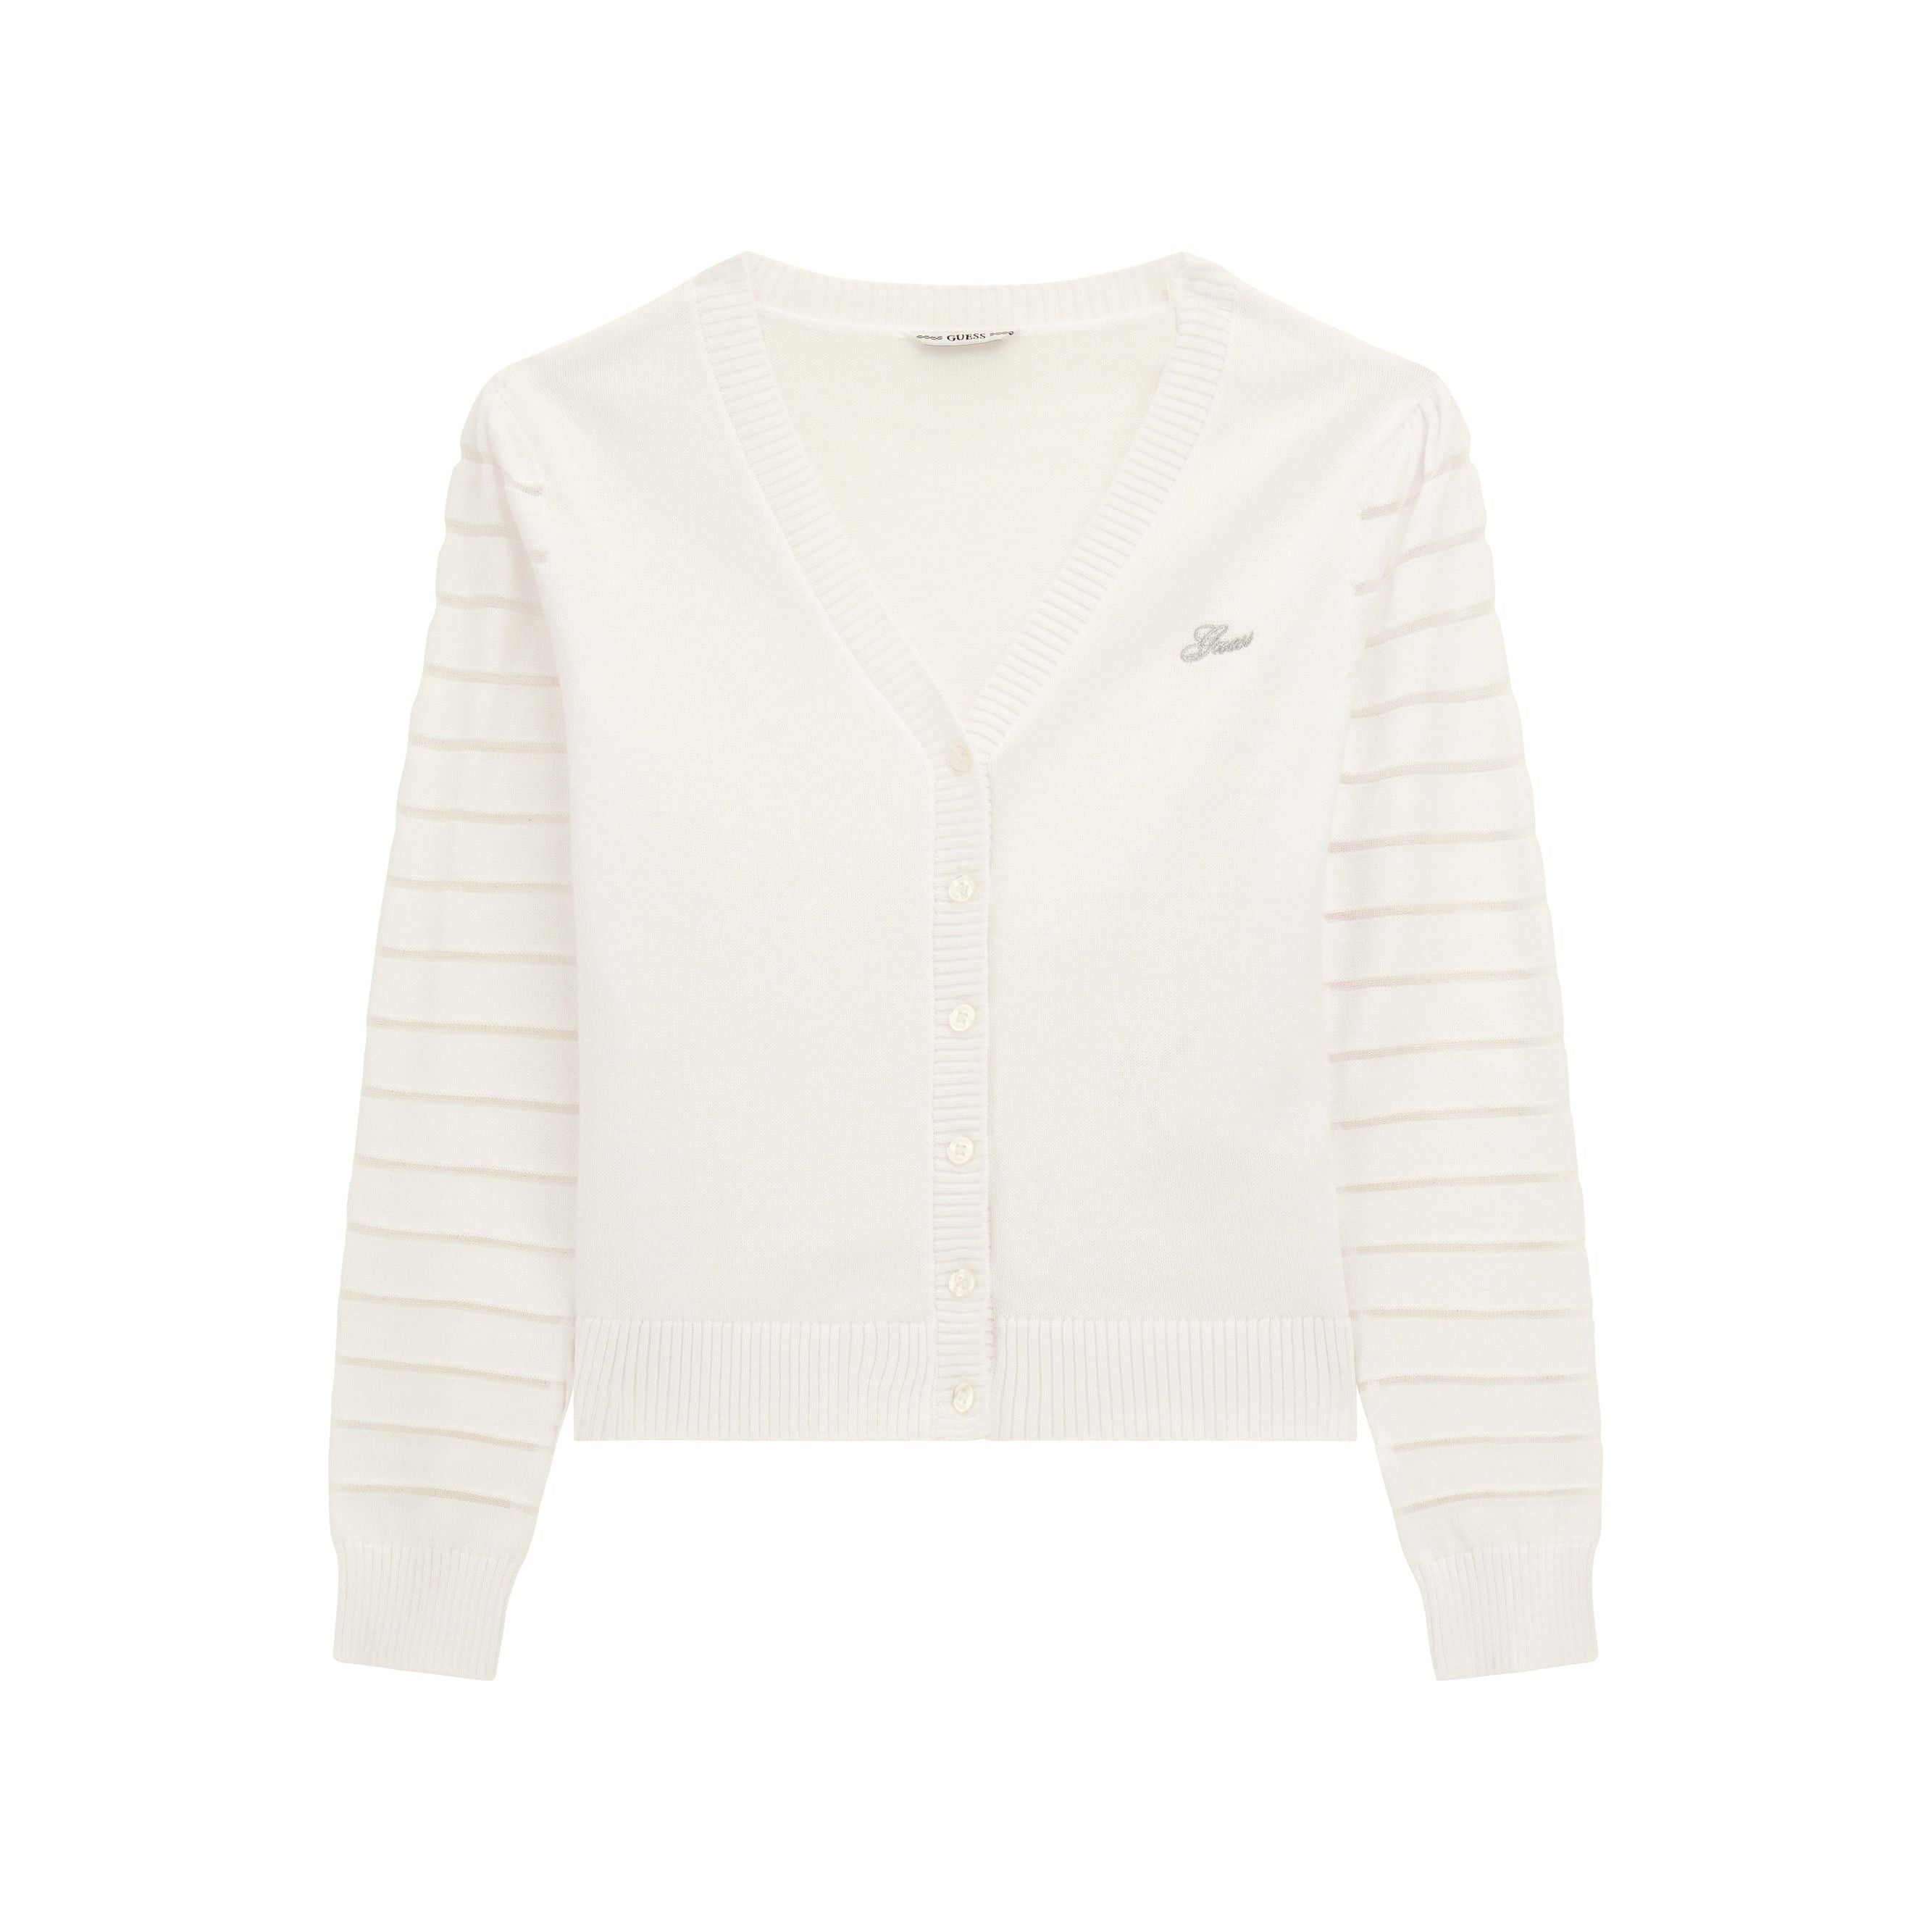 Guess - Girls Cardigan in Pure White